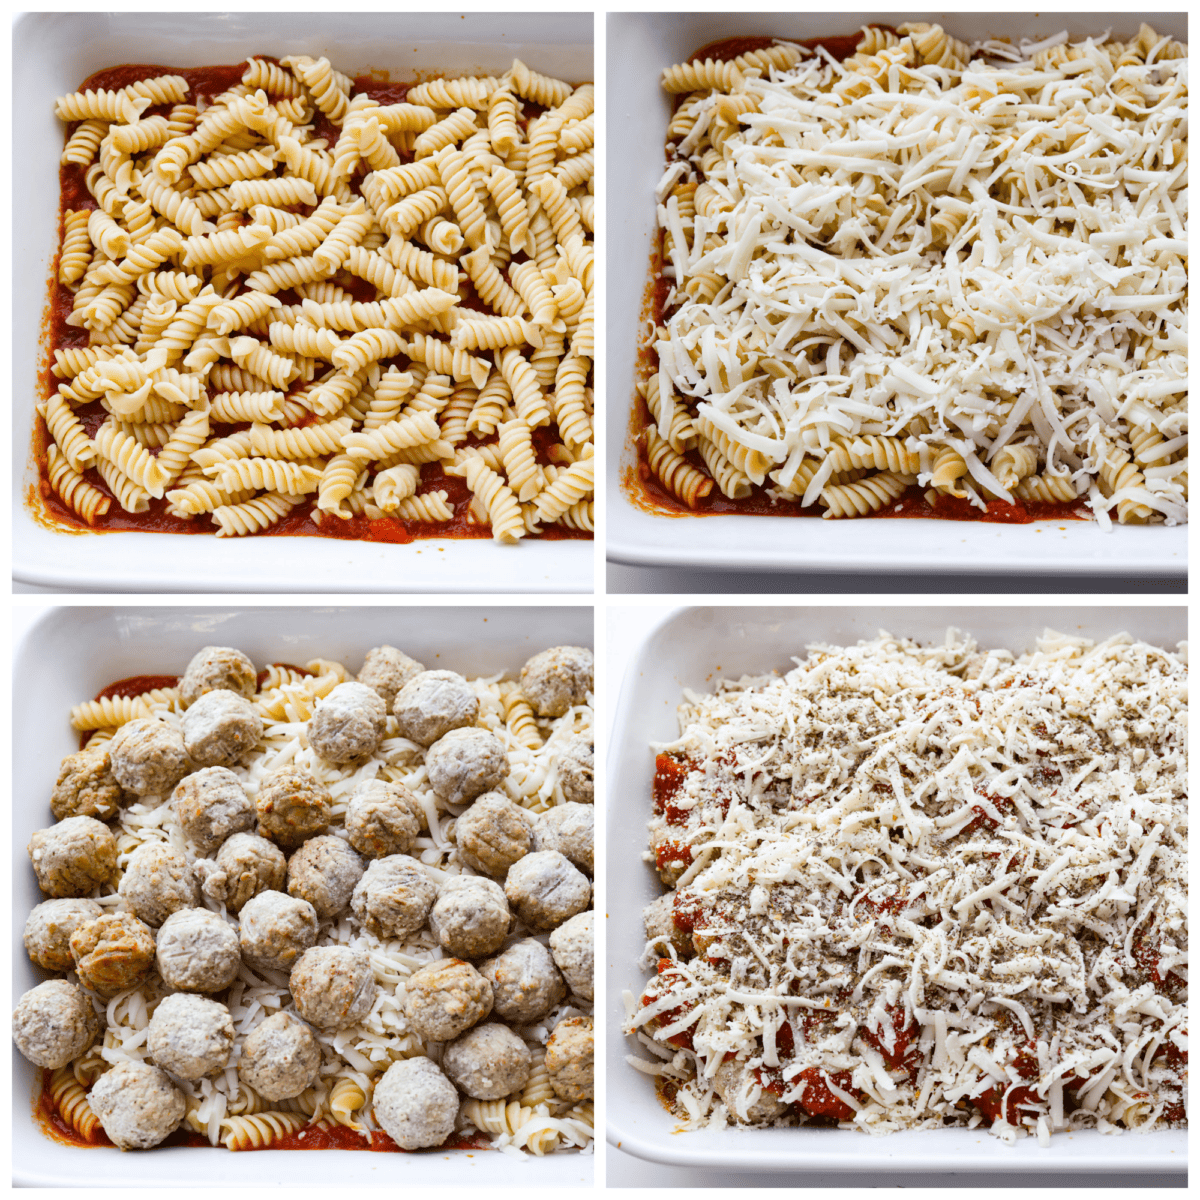 4-photo collage of frozen meatballs, cooked pasta, and cheese being added to a casserole dish.